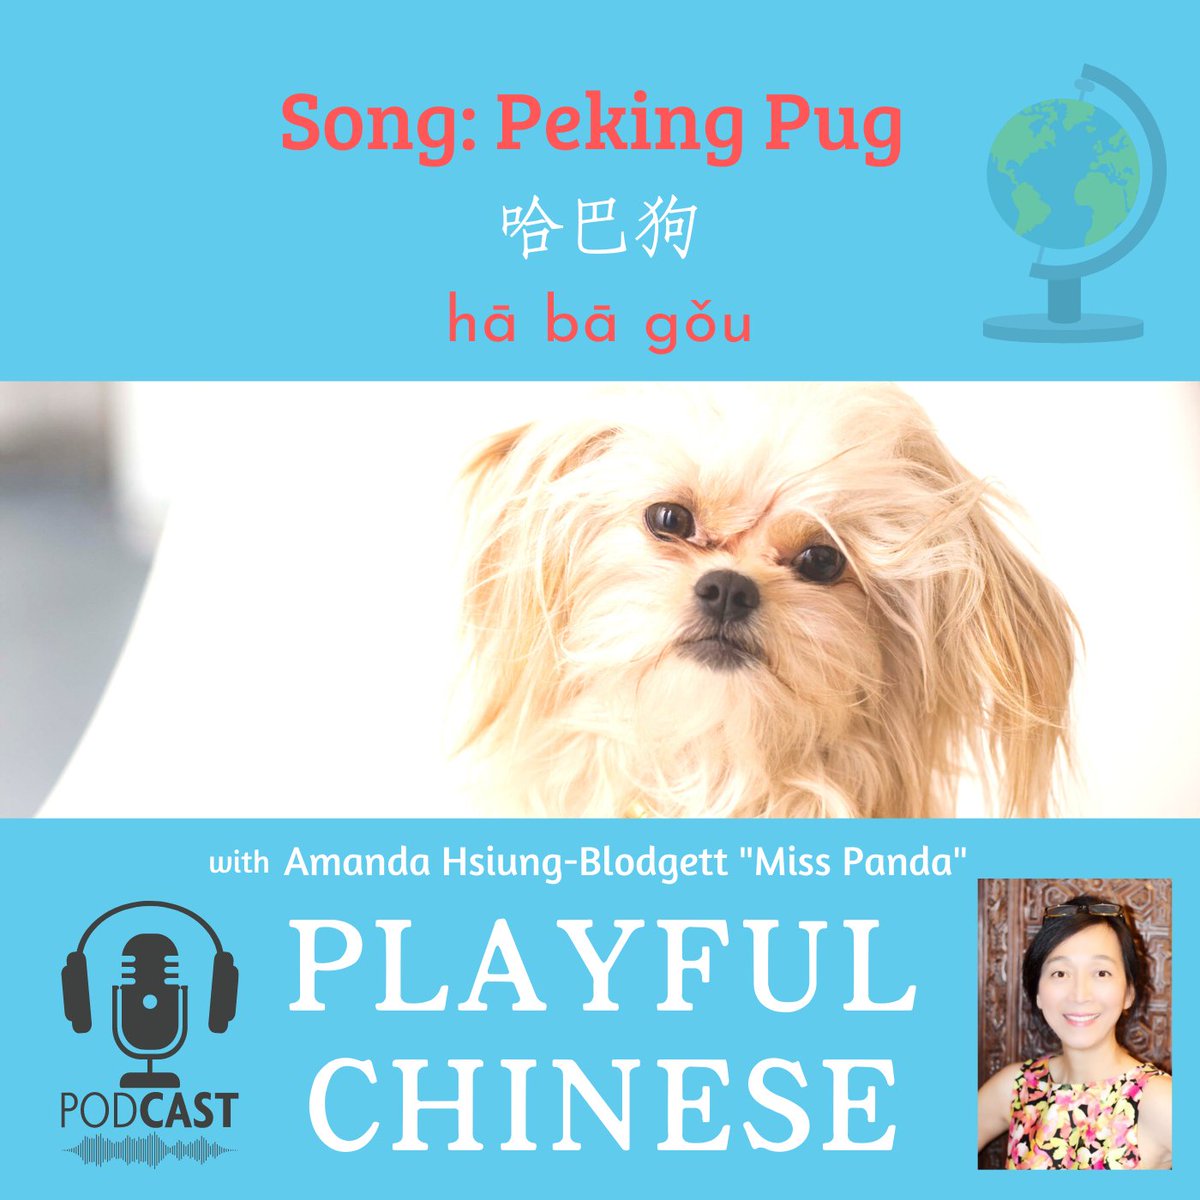 🎧🐶 This episode of the Playful Chinese #podcast is here to delight you and your child! Join us for a fun-filled journey with a catchy Chinese nursery rhyme about a Peking Pug. 🔗 Listen on your favorite podcast platform: podcasts.apple.com/nz/podcast/let… #PlayfulChinese #Nursery